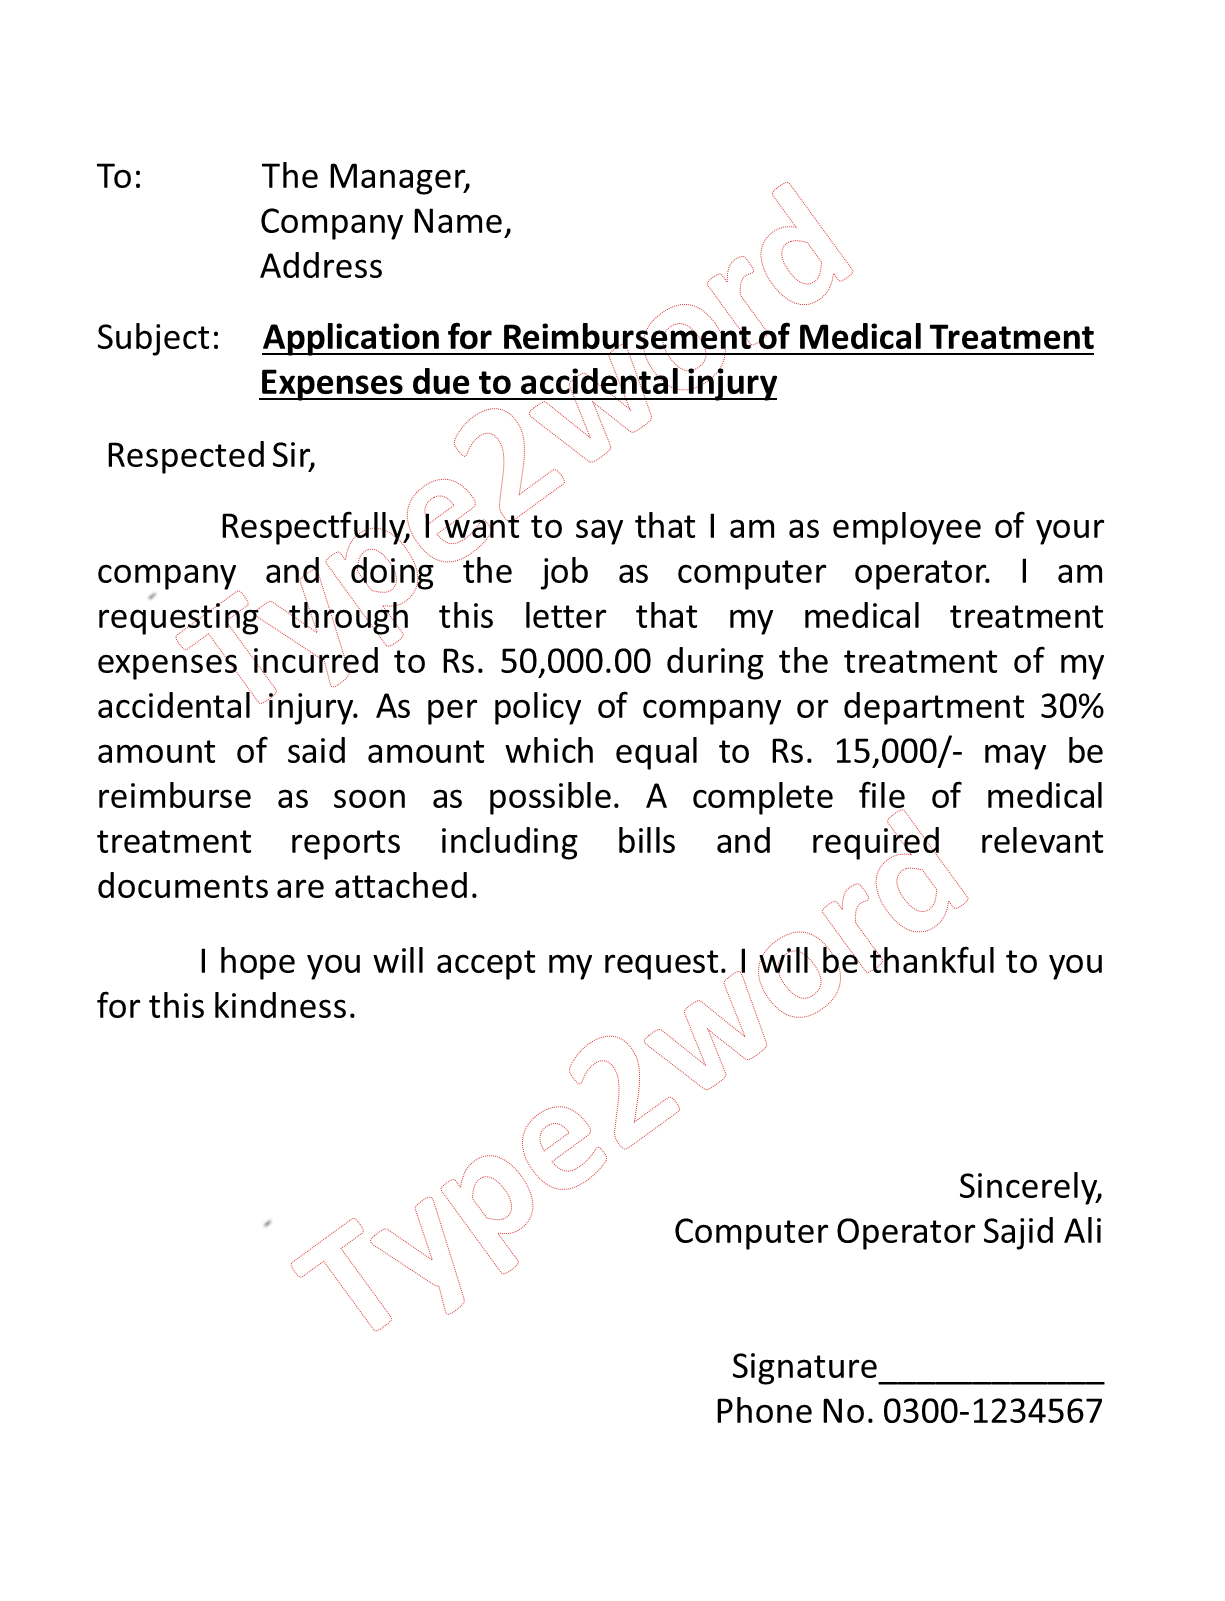 application-for-reimbursement-of-medical-treatment-expenses-due-to